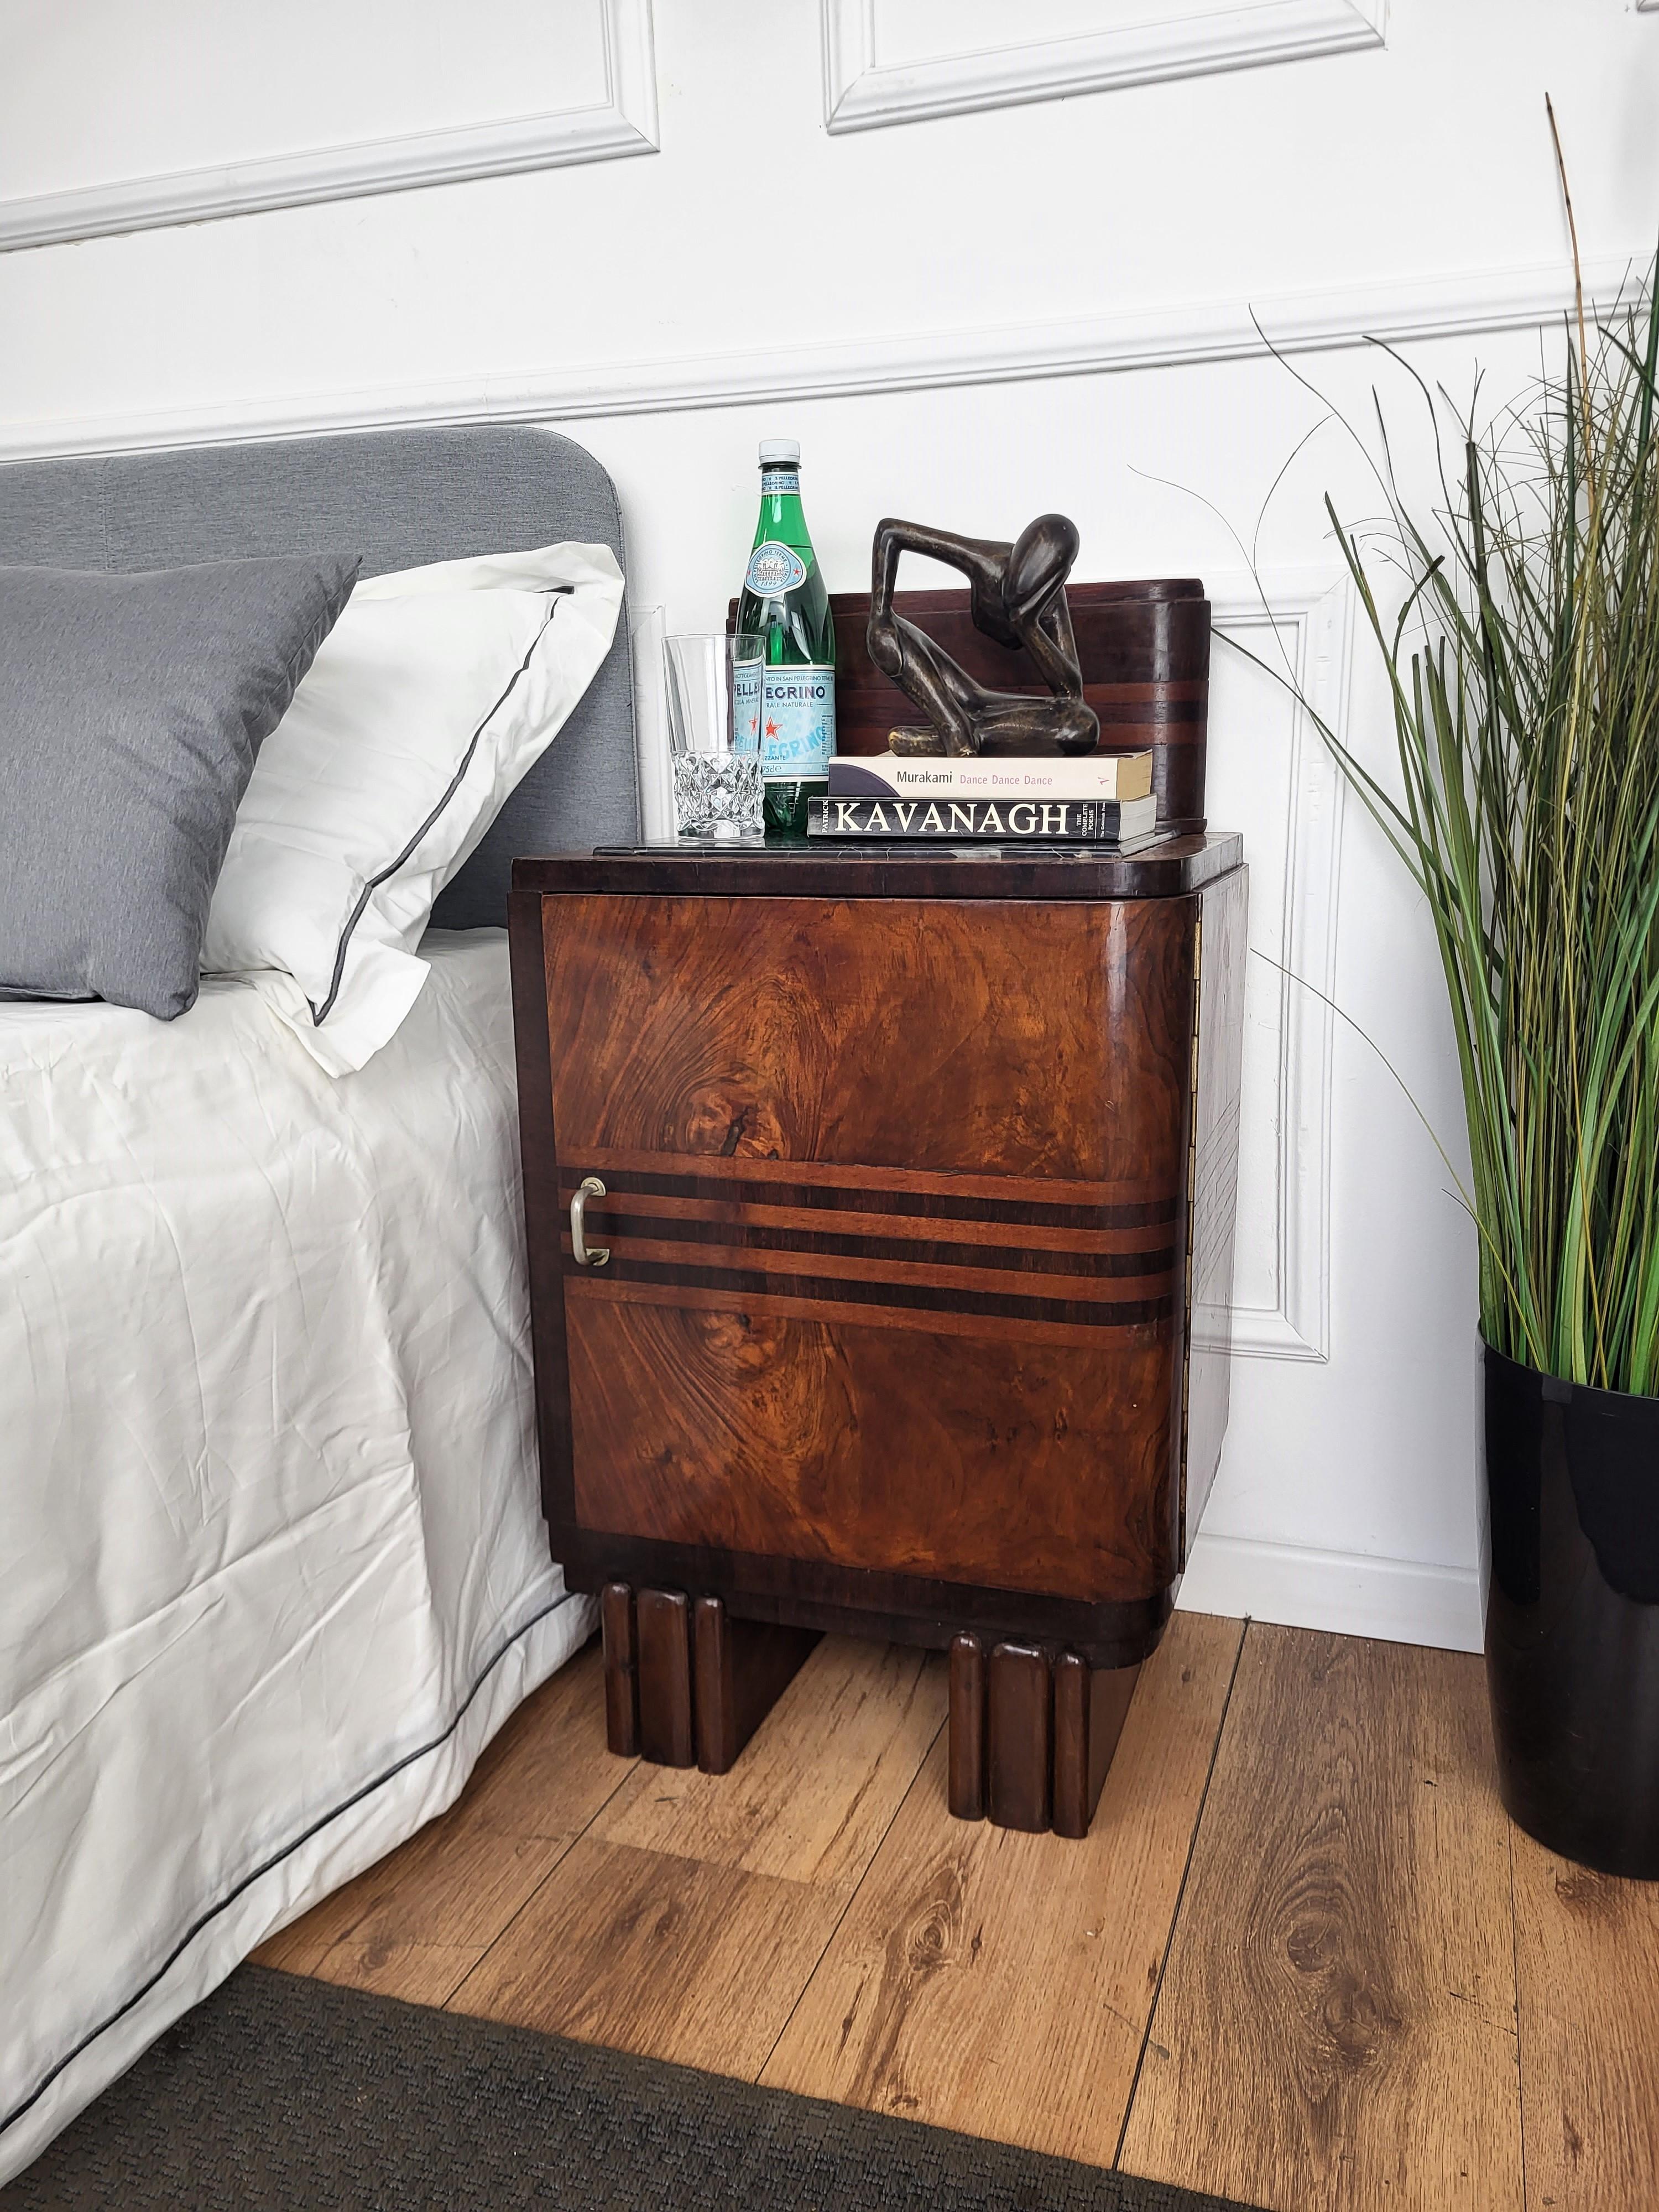 Very elegant and refined pair of Italian 1940s Art Deco bedside tables with great design shape and decors in veneer burl walnut briar wood, front door and internal drawer with black marble top. This night stands make a great look in any style